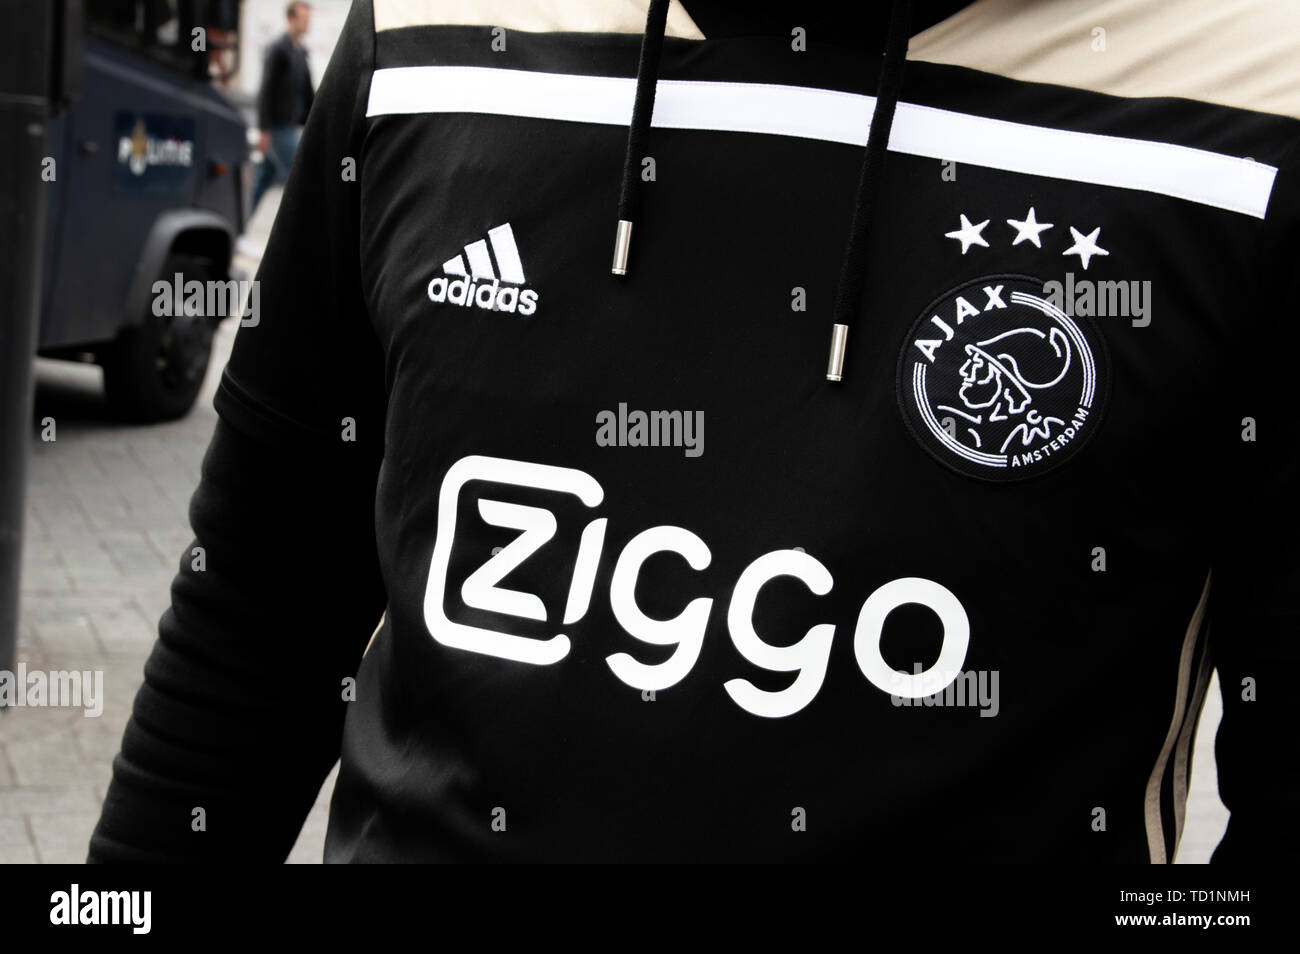 Ajax Sweater At Amsterdam The Netherlands 2010 Stock Photo - Alamy